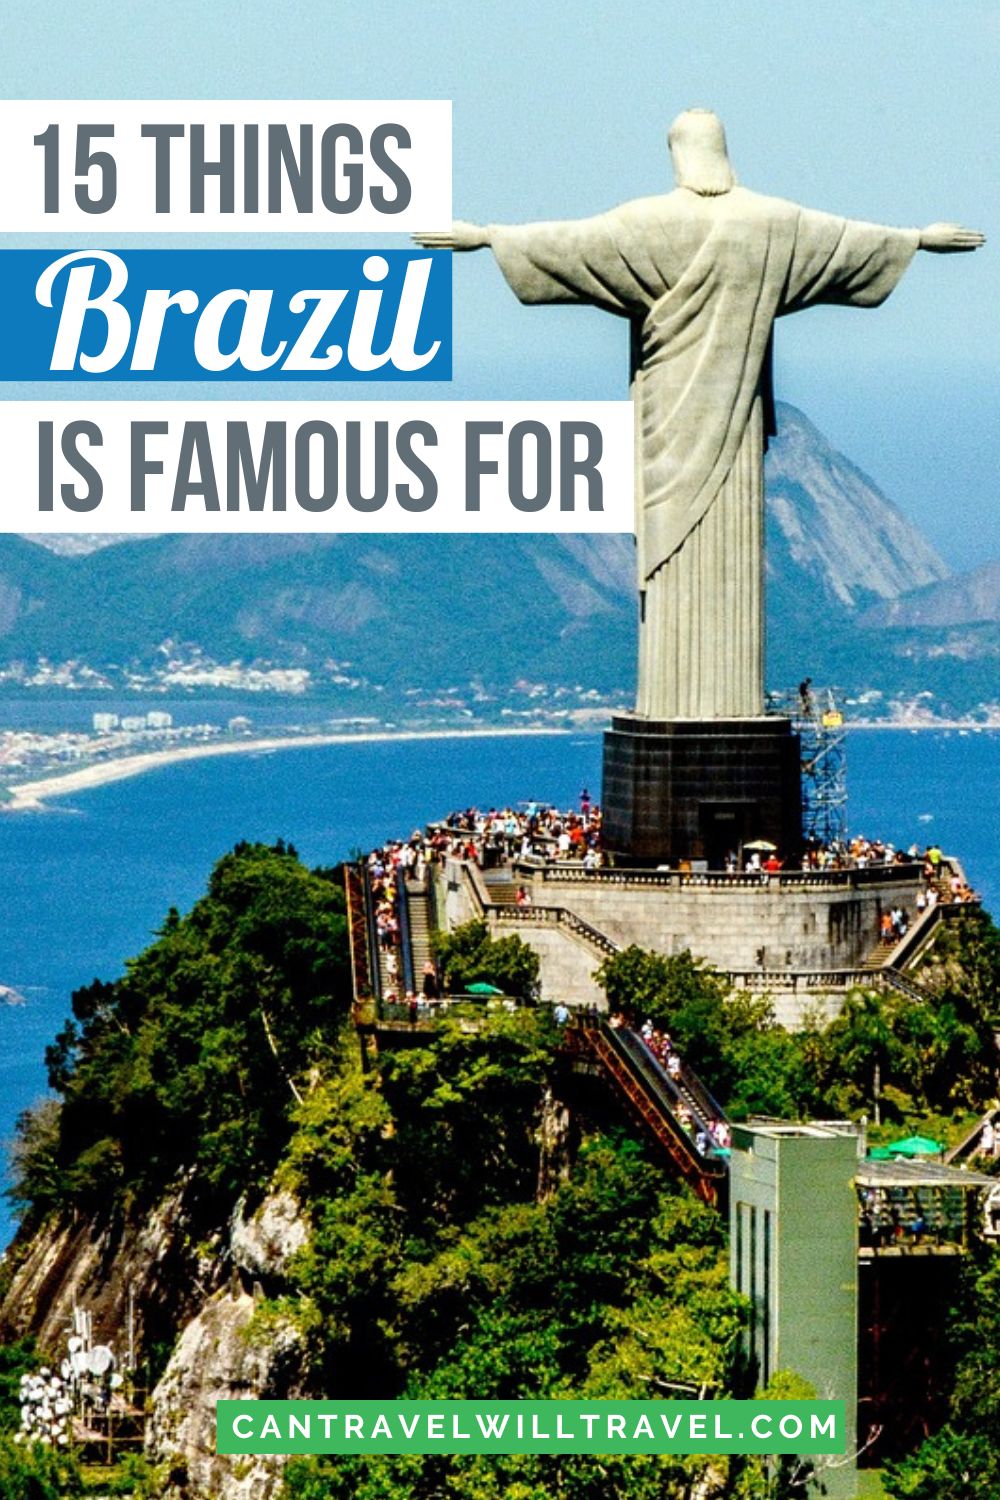 15 Things Brazil Is Famous For